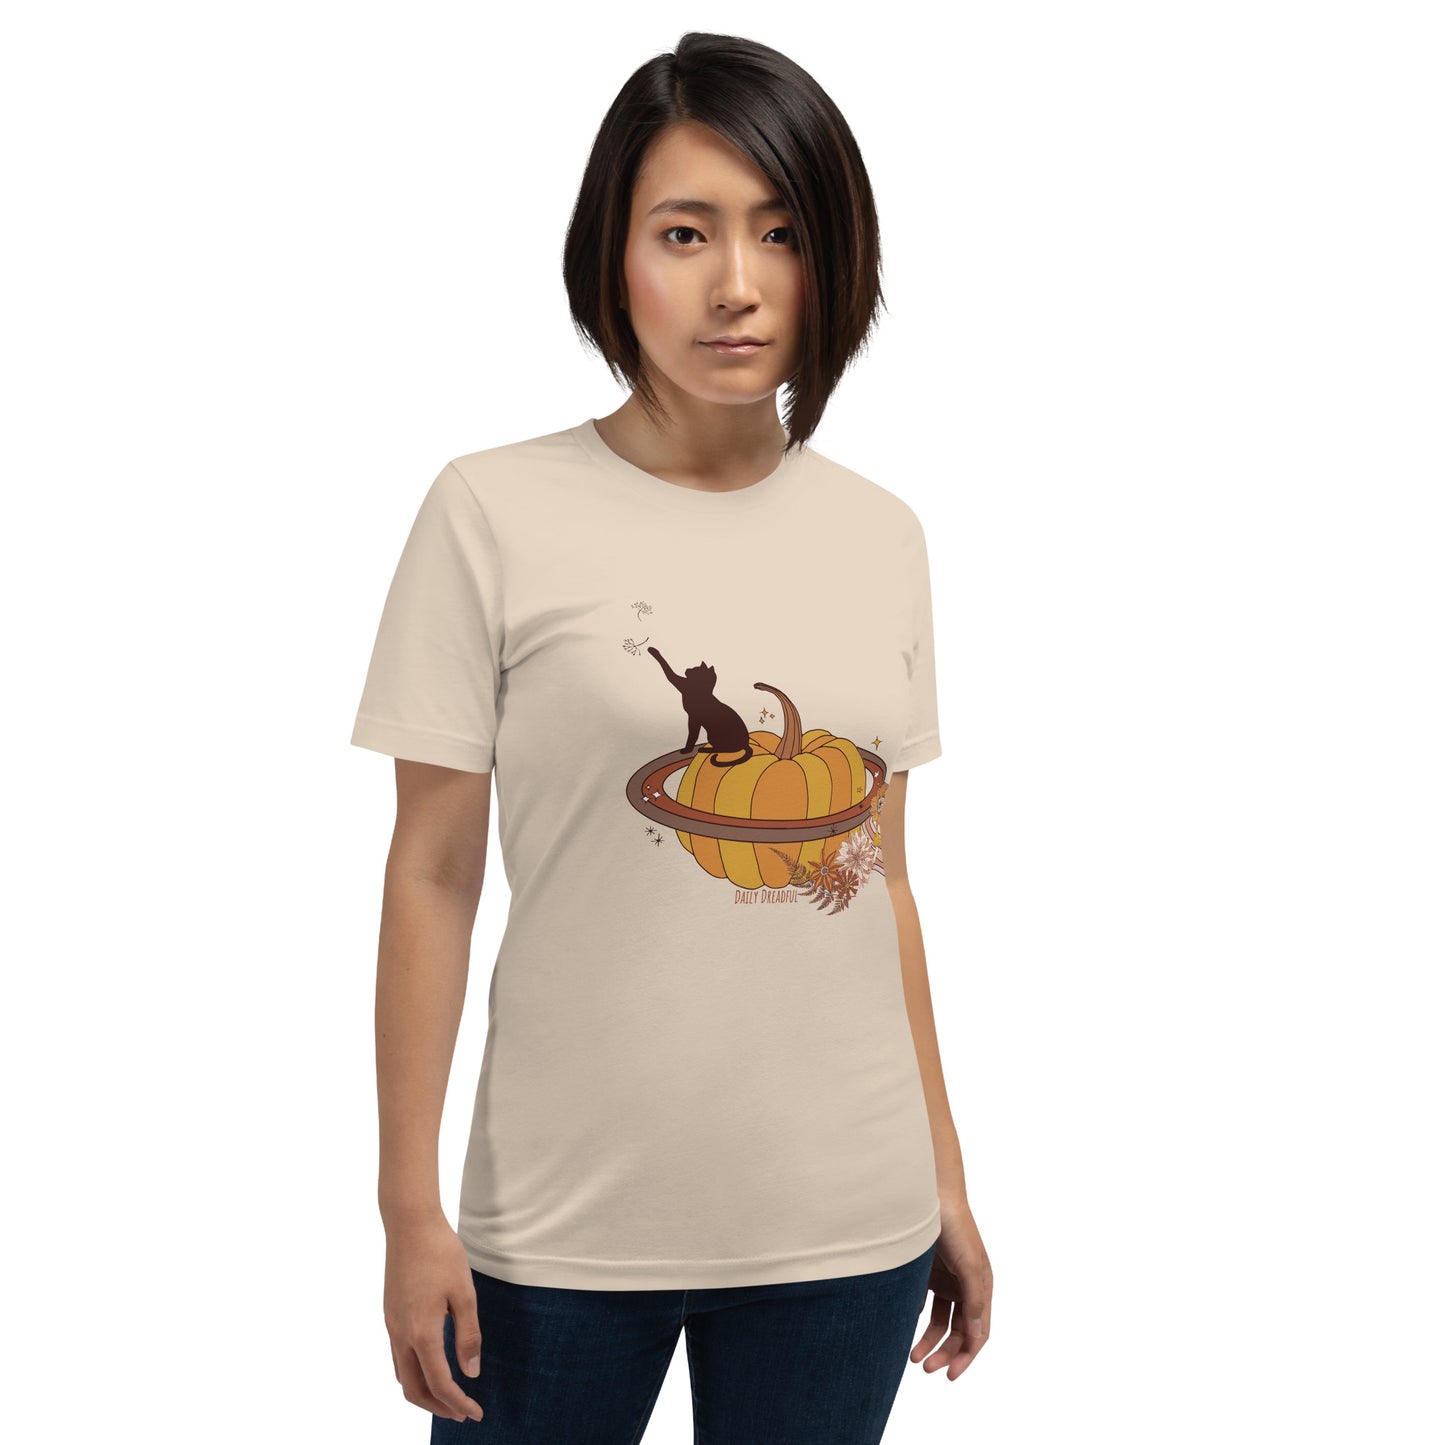 soft cream "spooky fall kitty" t-shirt for women from Daily Dreadful